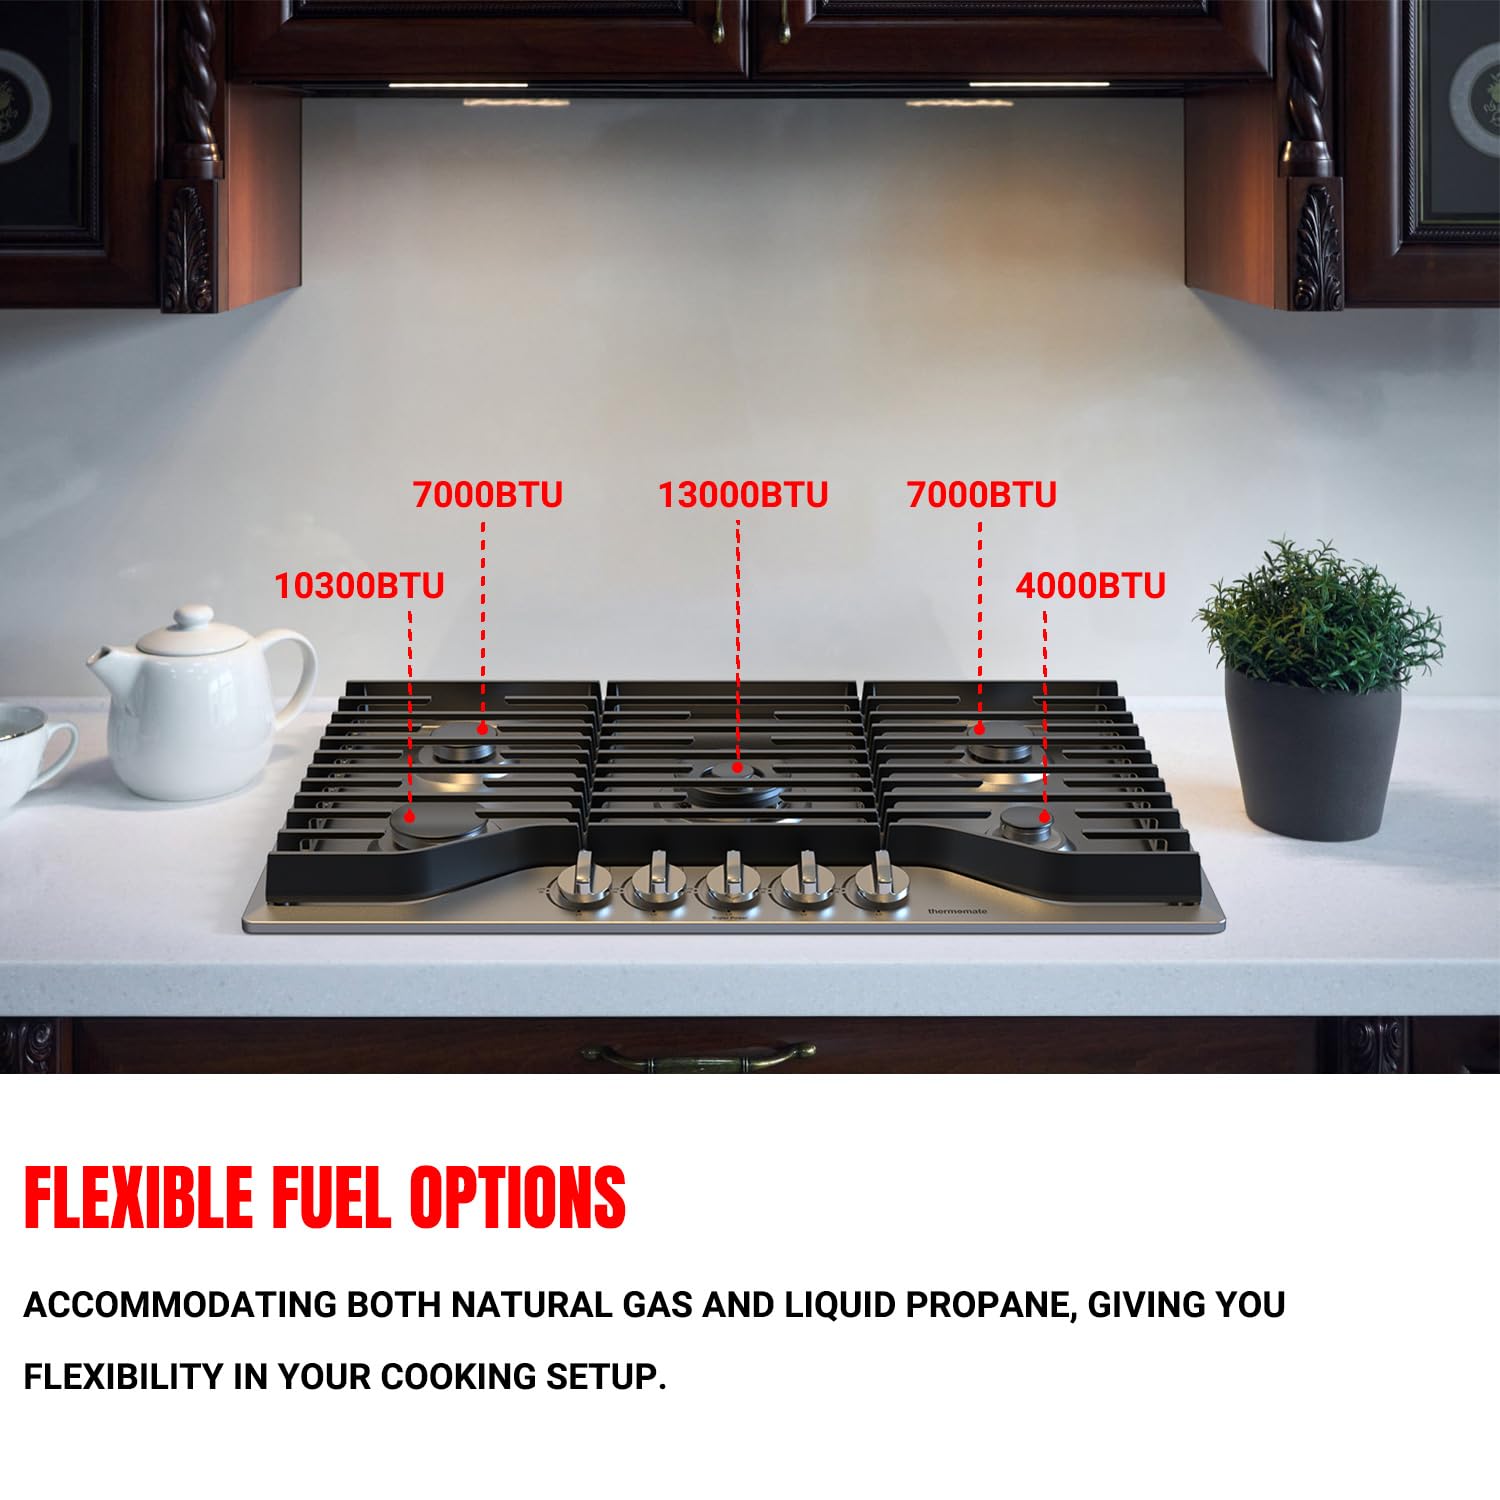 ACCOMMODATING BOTH NATURAL GAS AND LIQUID PROPANE, GIVING YOUFLEXIBILITY IN YOUR COOKING SETUP.